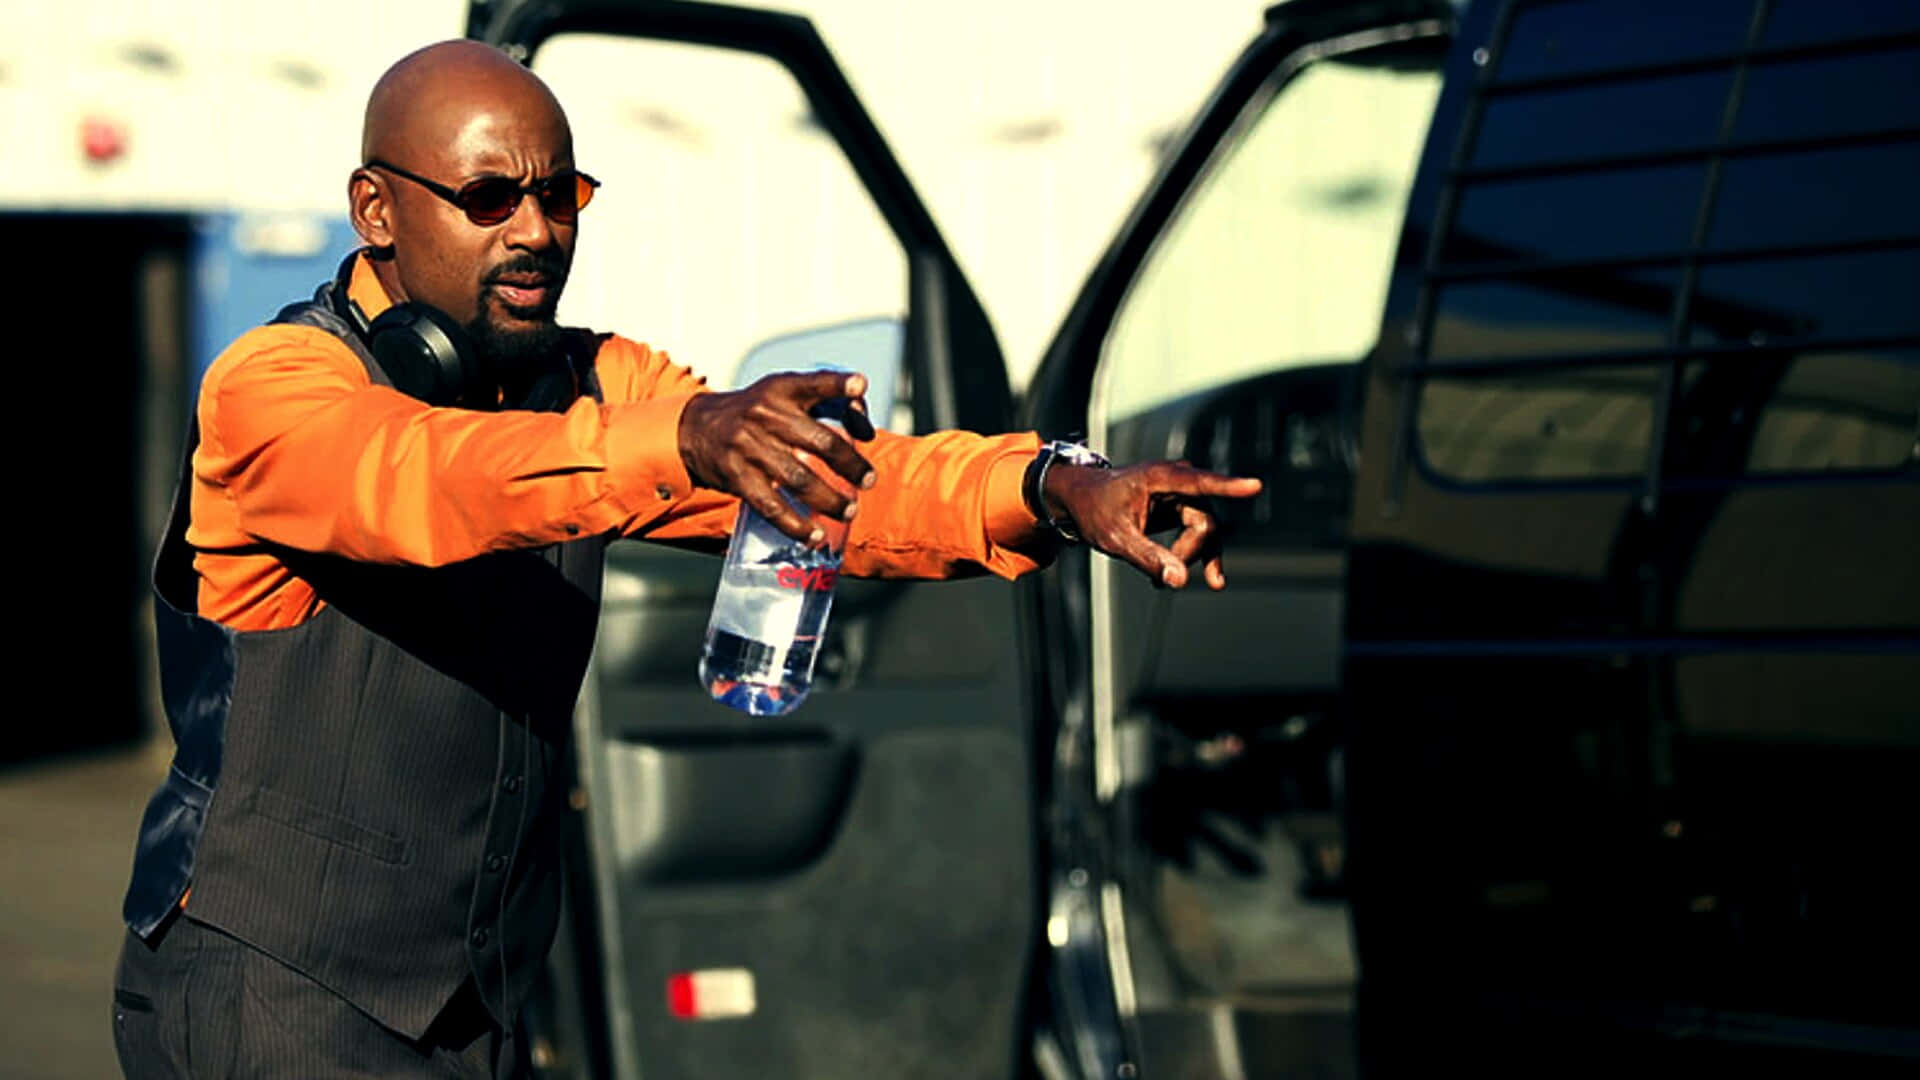 Romany Malco in the role of Tijuana Jackson from the movie "Purpose Over Prison". Wallpaper